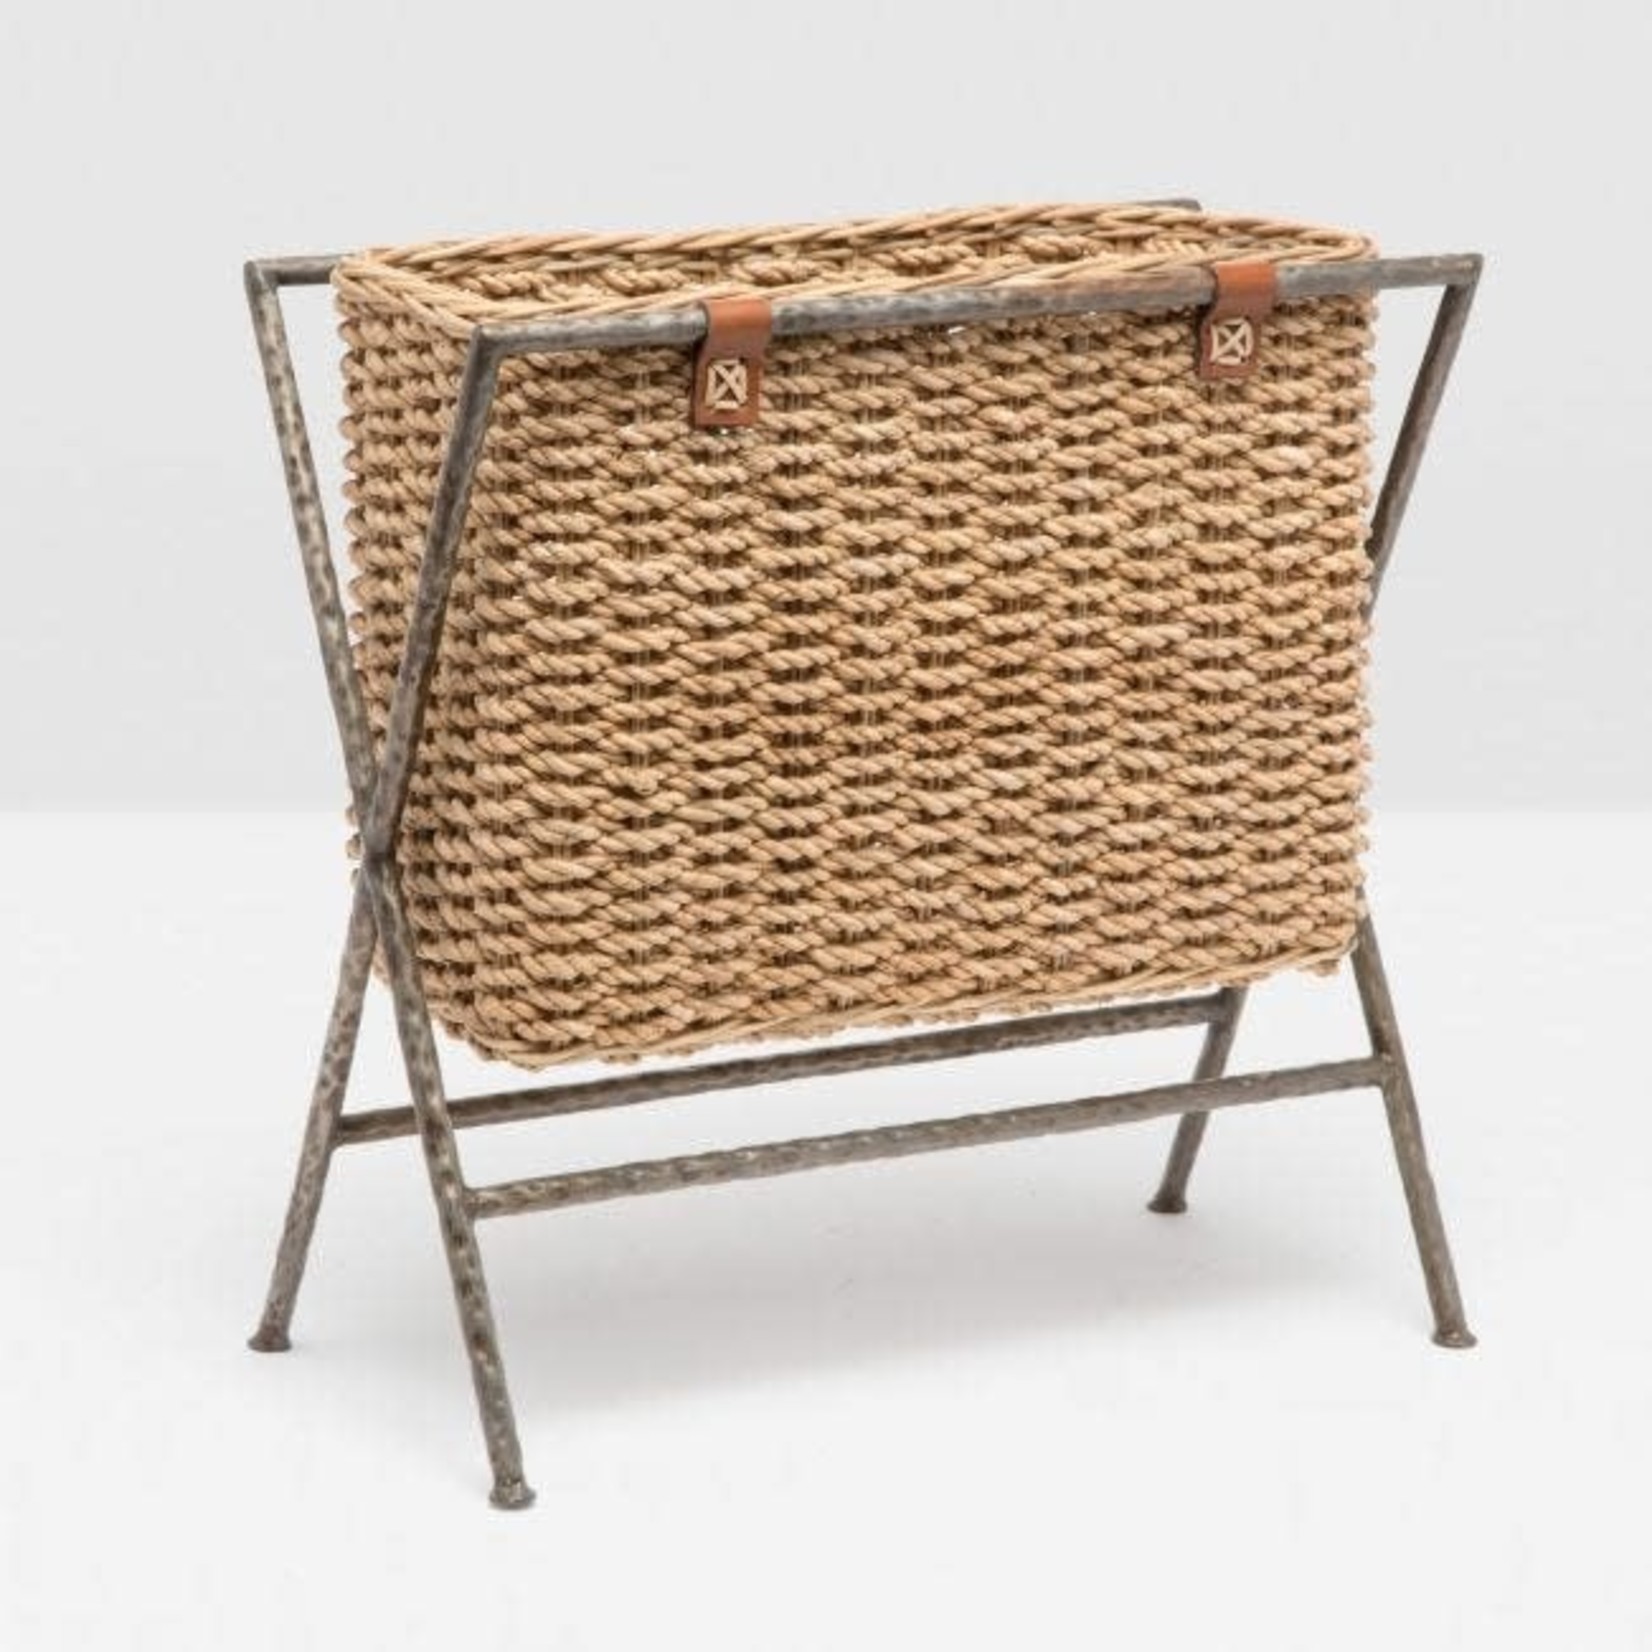 Pigeon and Poodle Hemley Natural Magazine Rack-Woven Seagrass